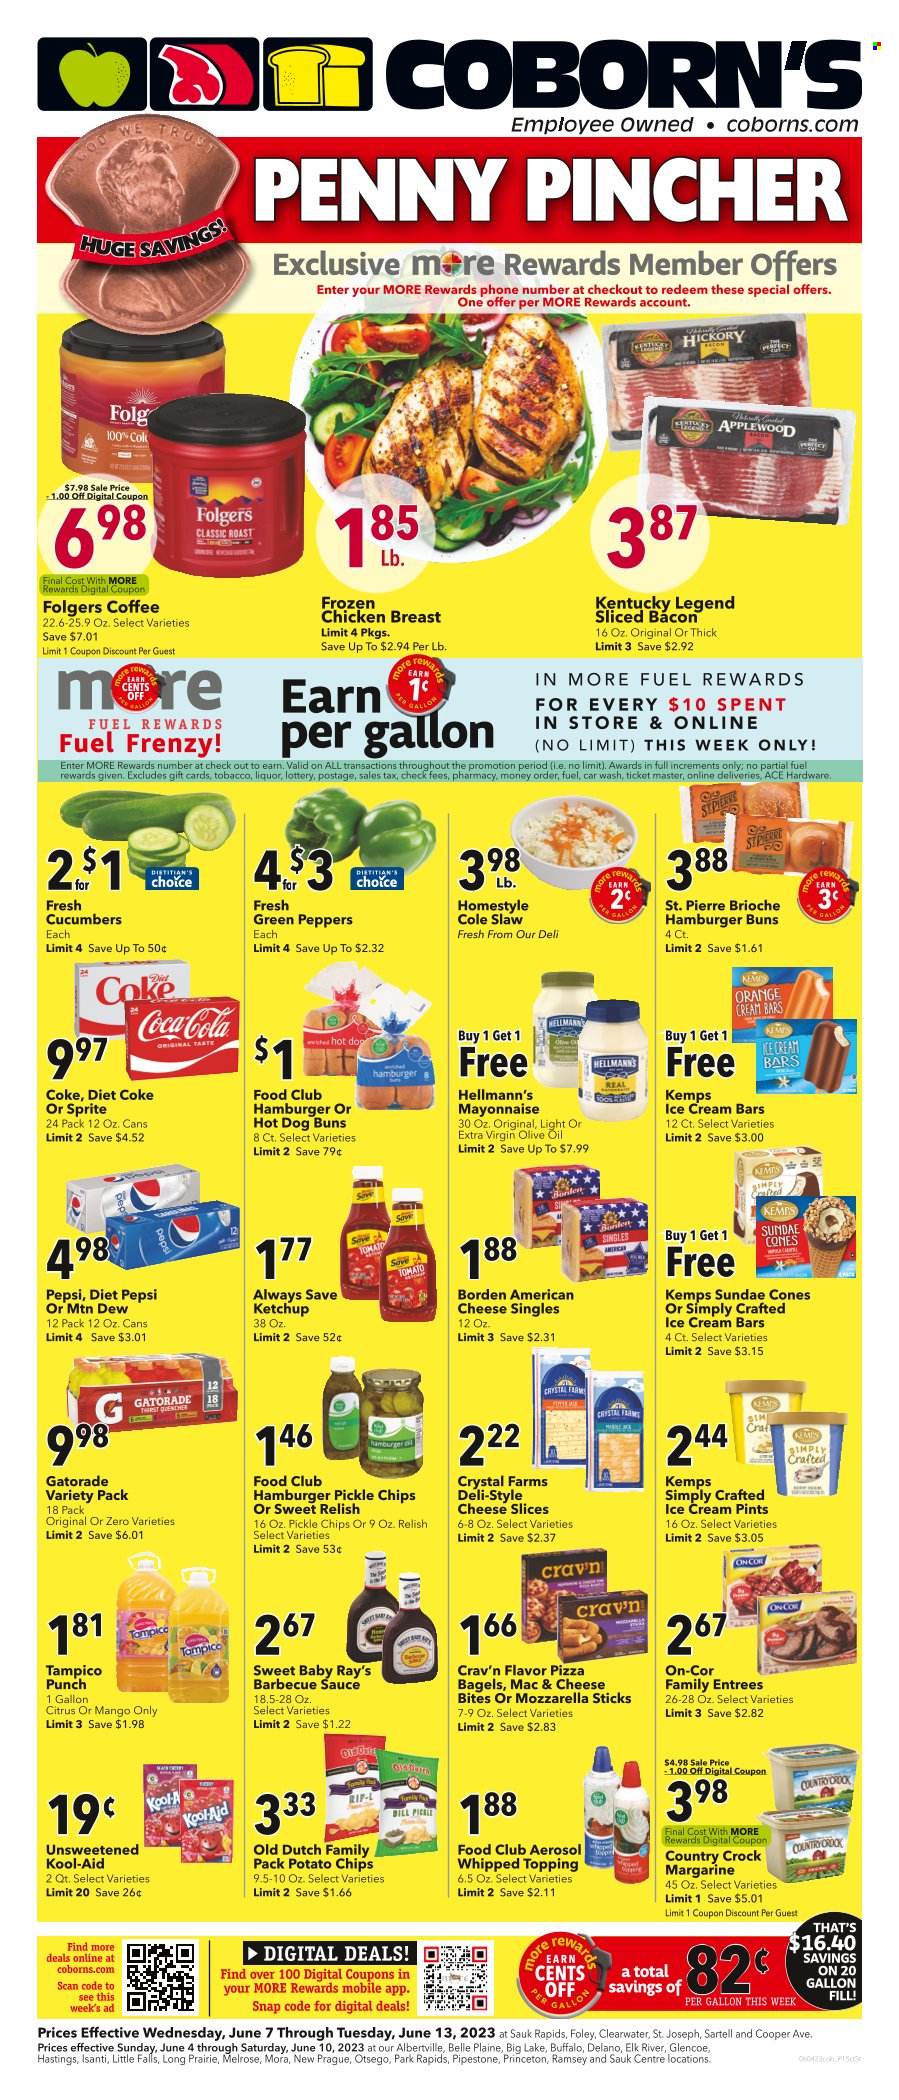 thumbnail - Coborn's Flyer - 06/07/2023 - 06/13/2023 - Sales products - hot dog rolls, buns, burger buns, brioche, Ace, cucumber, coleslaw, snack, green pepper, ready meal, chicken breasts, american cheese, sliced cheese, cheese, Melrose, Kemps, margarine, mayonnaise, Hellmann’s, ice cream, ice cream bars, ice cones, potato chips, topping, pickles, relish, pickled vegetables, BBQ sauce, ketchup, extra virgin olive oil, olive oil, Coca-Cola, Mountain Dew, Sprite, Pepsi, Diet Pepsi, Diet Coke, soft drink, Gatorade, fruit punch, Coke, electrolyte drink, carbonated soft drink, powder drink, Folgers, alcohol, liquor, Trust. Page 1.